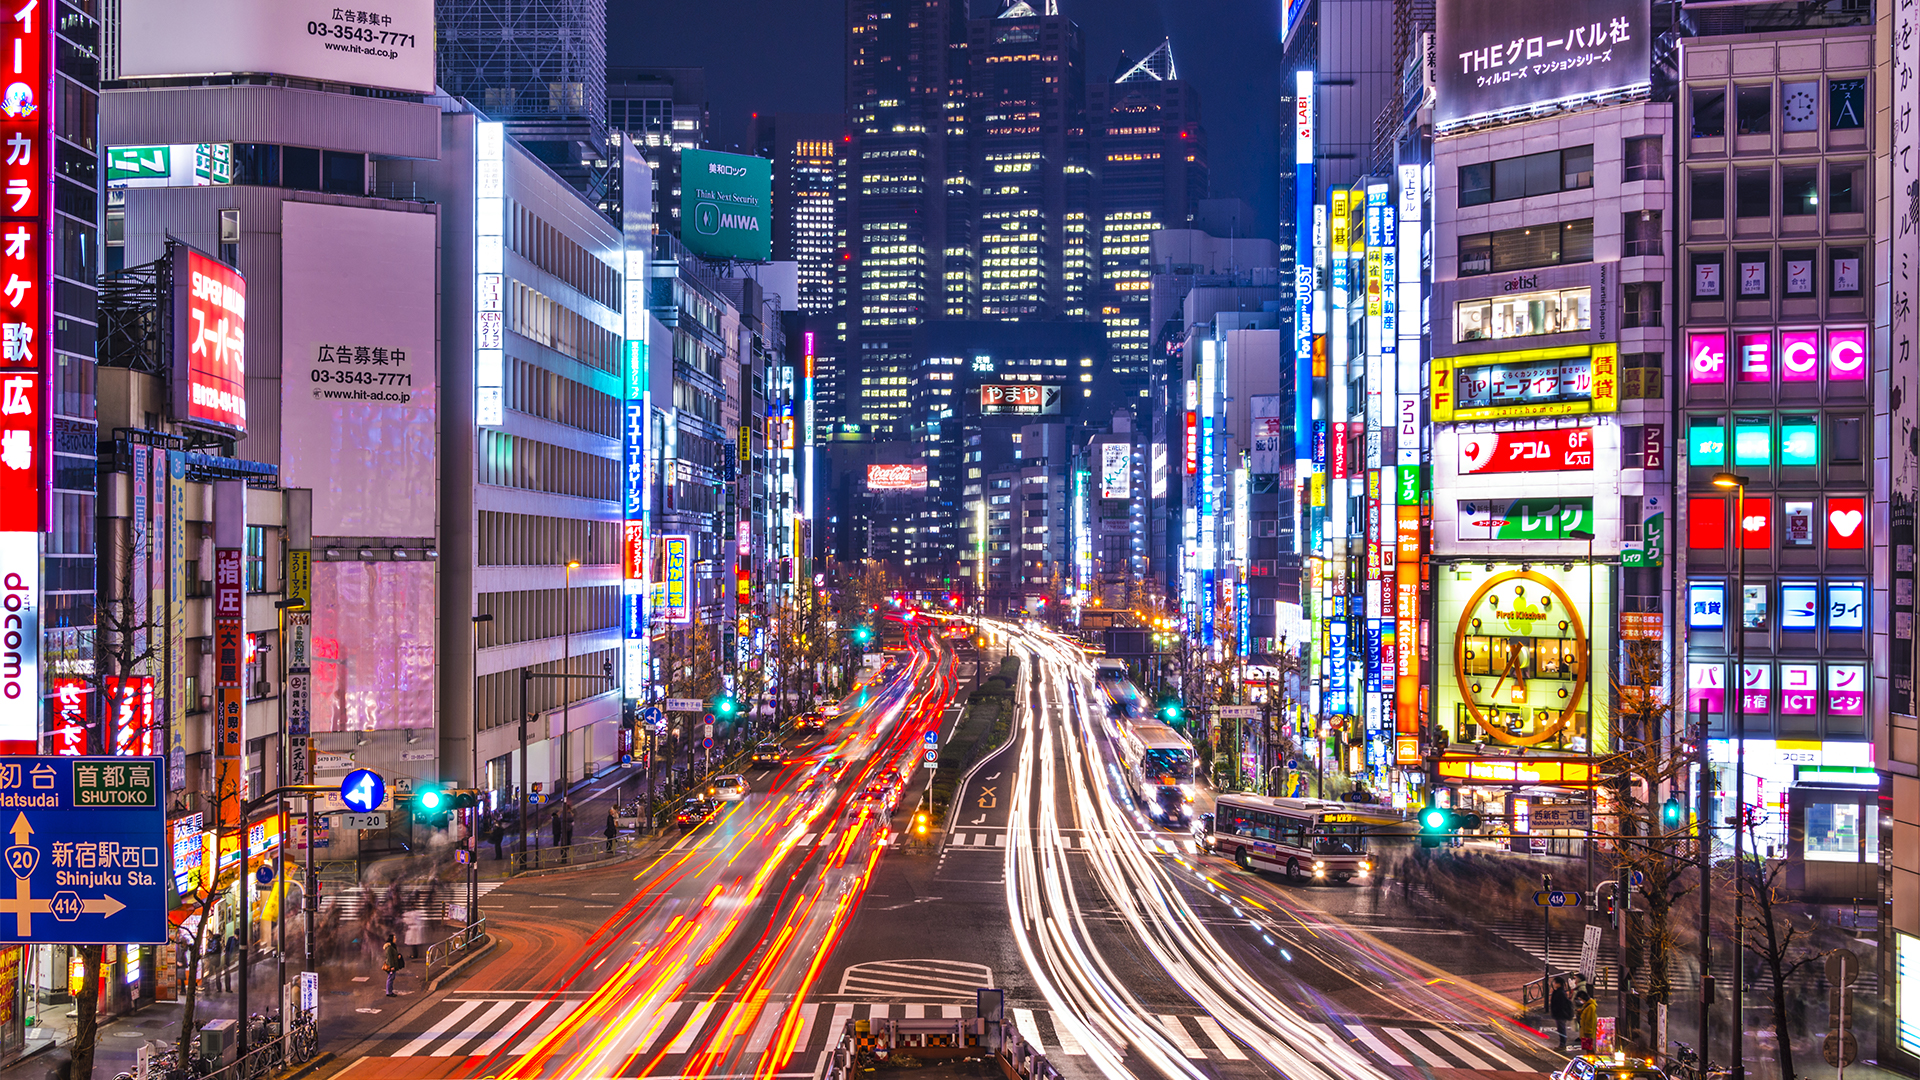 Direct flights from Calgary to Tokyo for 1108CAD round-trip including GST!